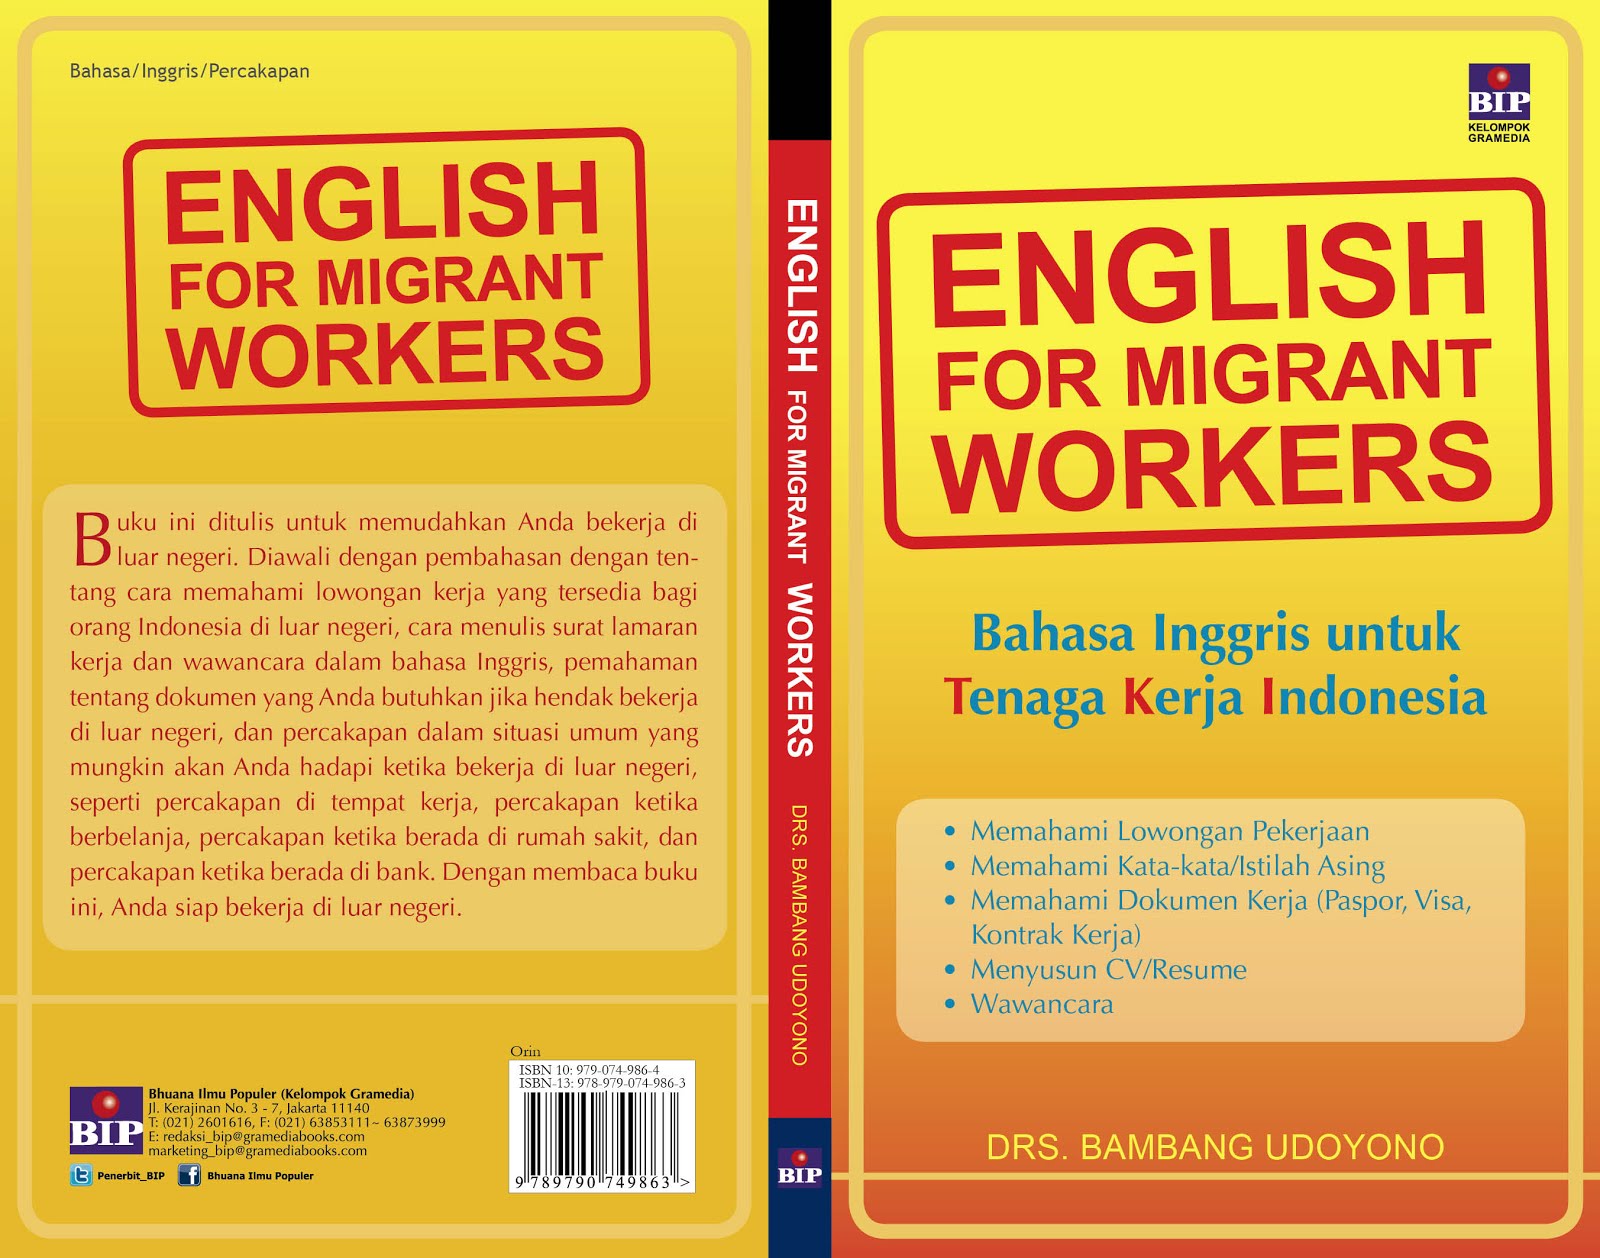 English for Migrant workers